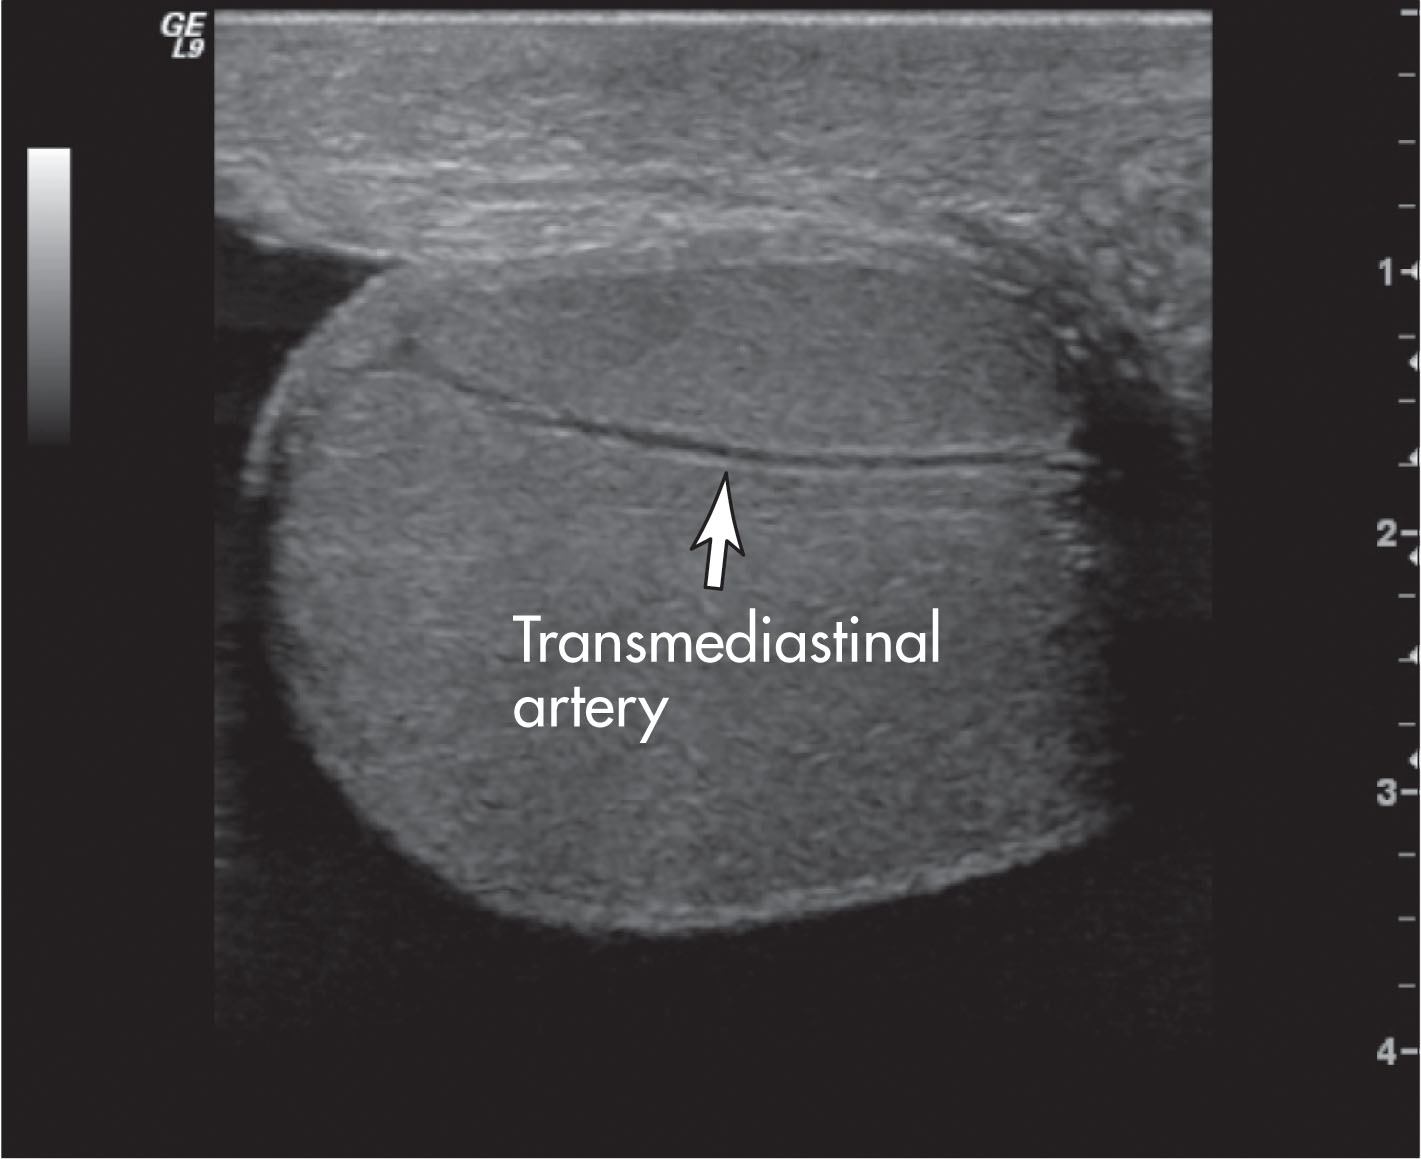 Fig. 23.8, Transverse ultrasound image shows a normal transmediastinal artery coursing from the mediastinum to the testicular capsule. It appears as an anechoic or hypoechoic tube. Transmediastinal arteries are seen in approximately 50% of testes.